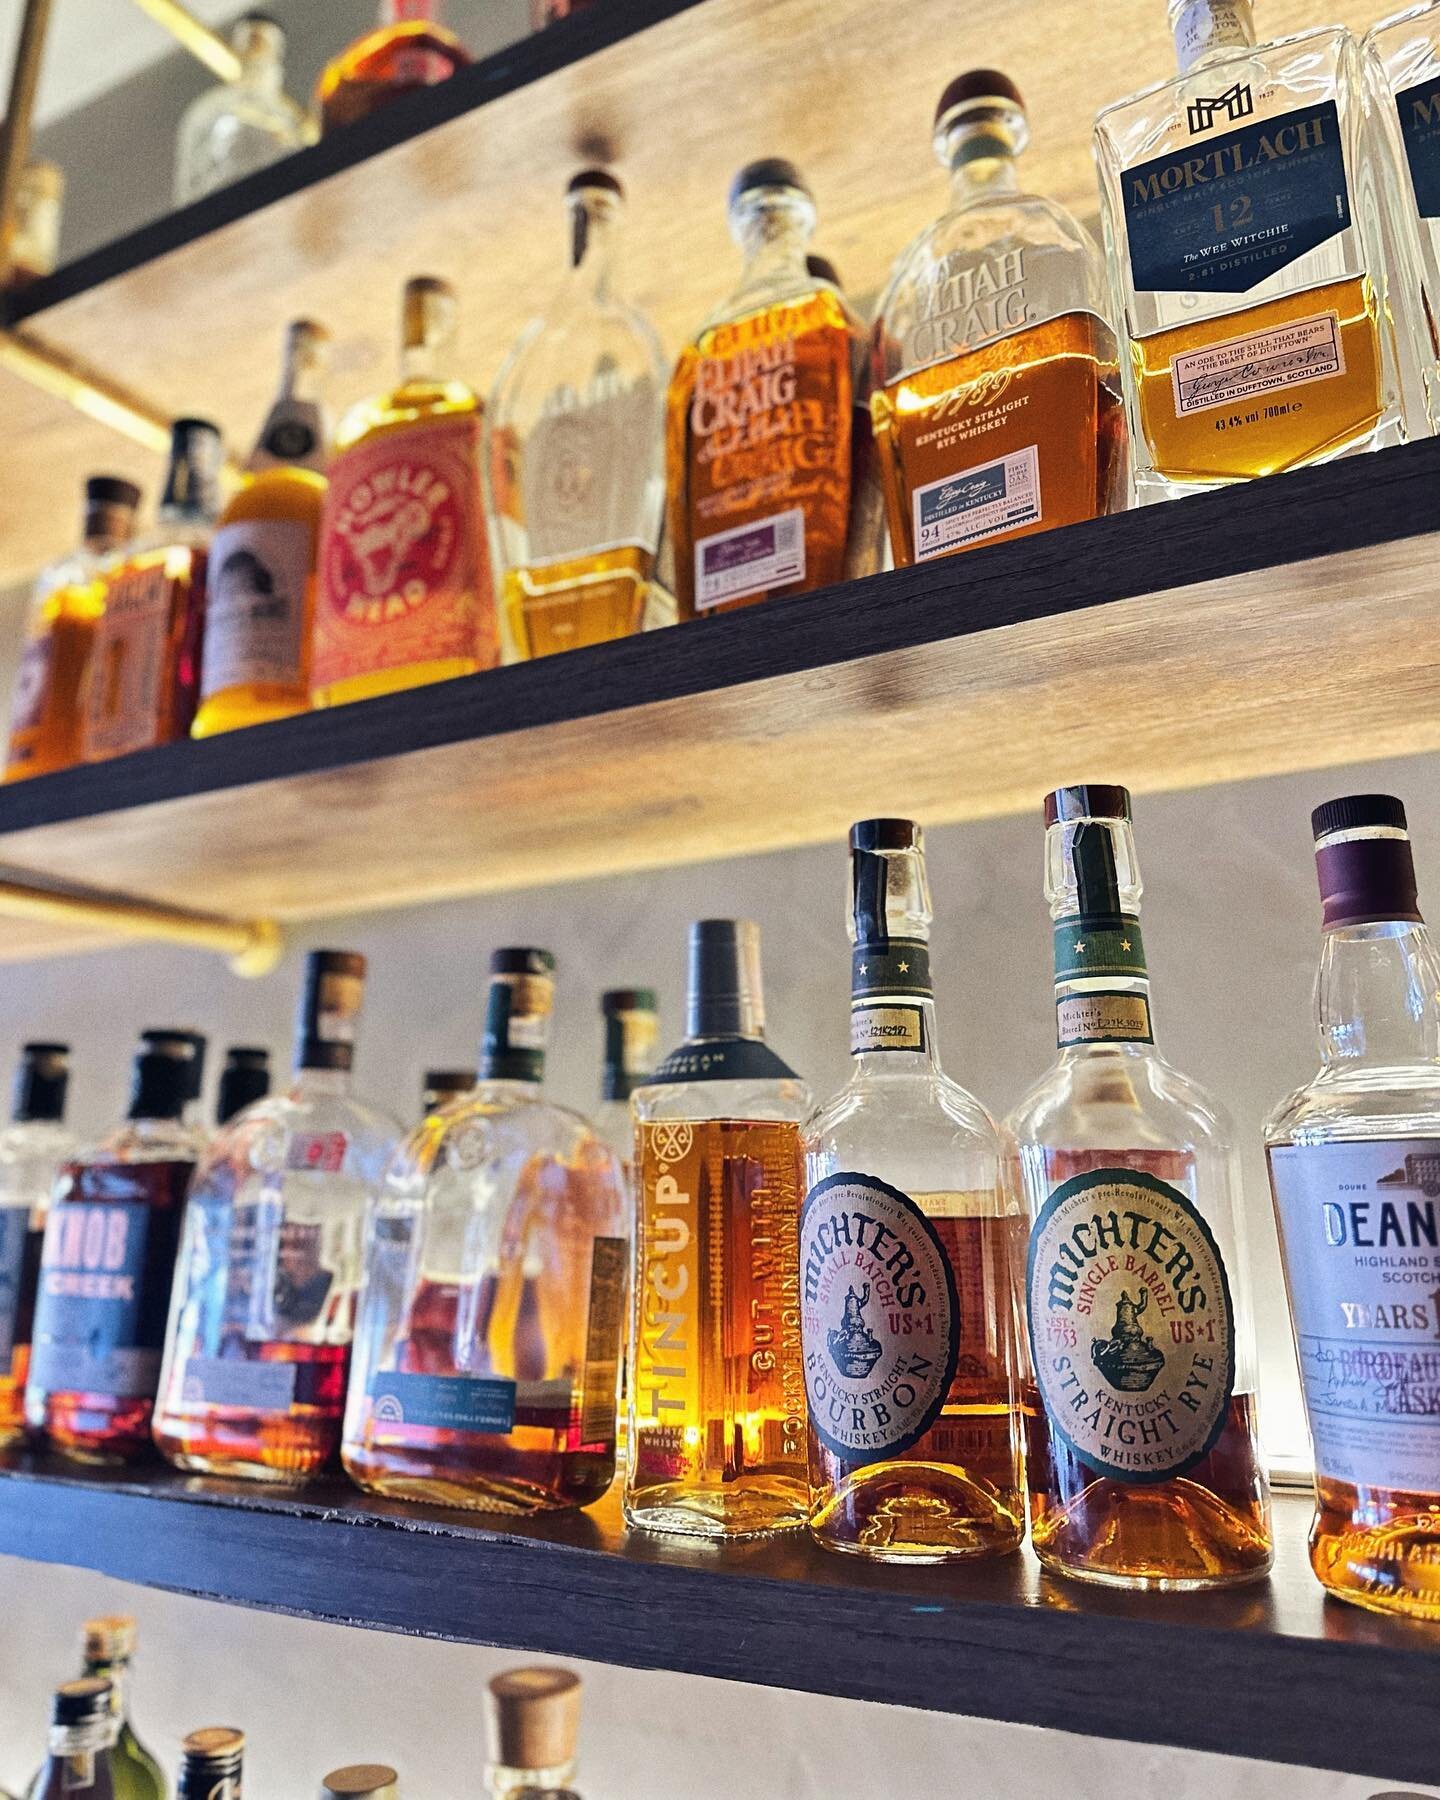 What's your go-to Bourbon ? 🤣🥃

Enjoy 50% off all drams during our 𝐝𝐚𝐢𝐥𝐲 𝐡𝐚𝐩𝐩𝐲 𝐡𝐨𝐮𝐫 from 4pm to 7pm.

&mdash;&mdash;

𝟖𝟔 𝐏𝐑𝐎𝐎𝐅 𝐖𝐇𝐈𝐒𝐊𝐄𝐘 𝐁𝐀𝐑
https://86proofwhiskeybar.com/
📍 109 Xuan Thuy, Thao Dien